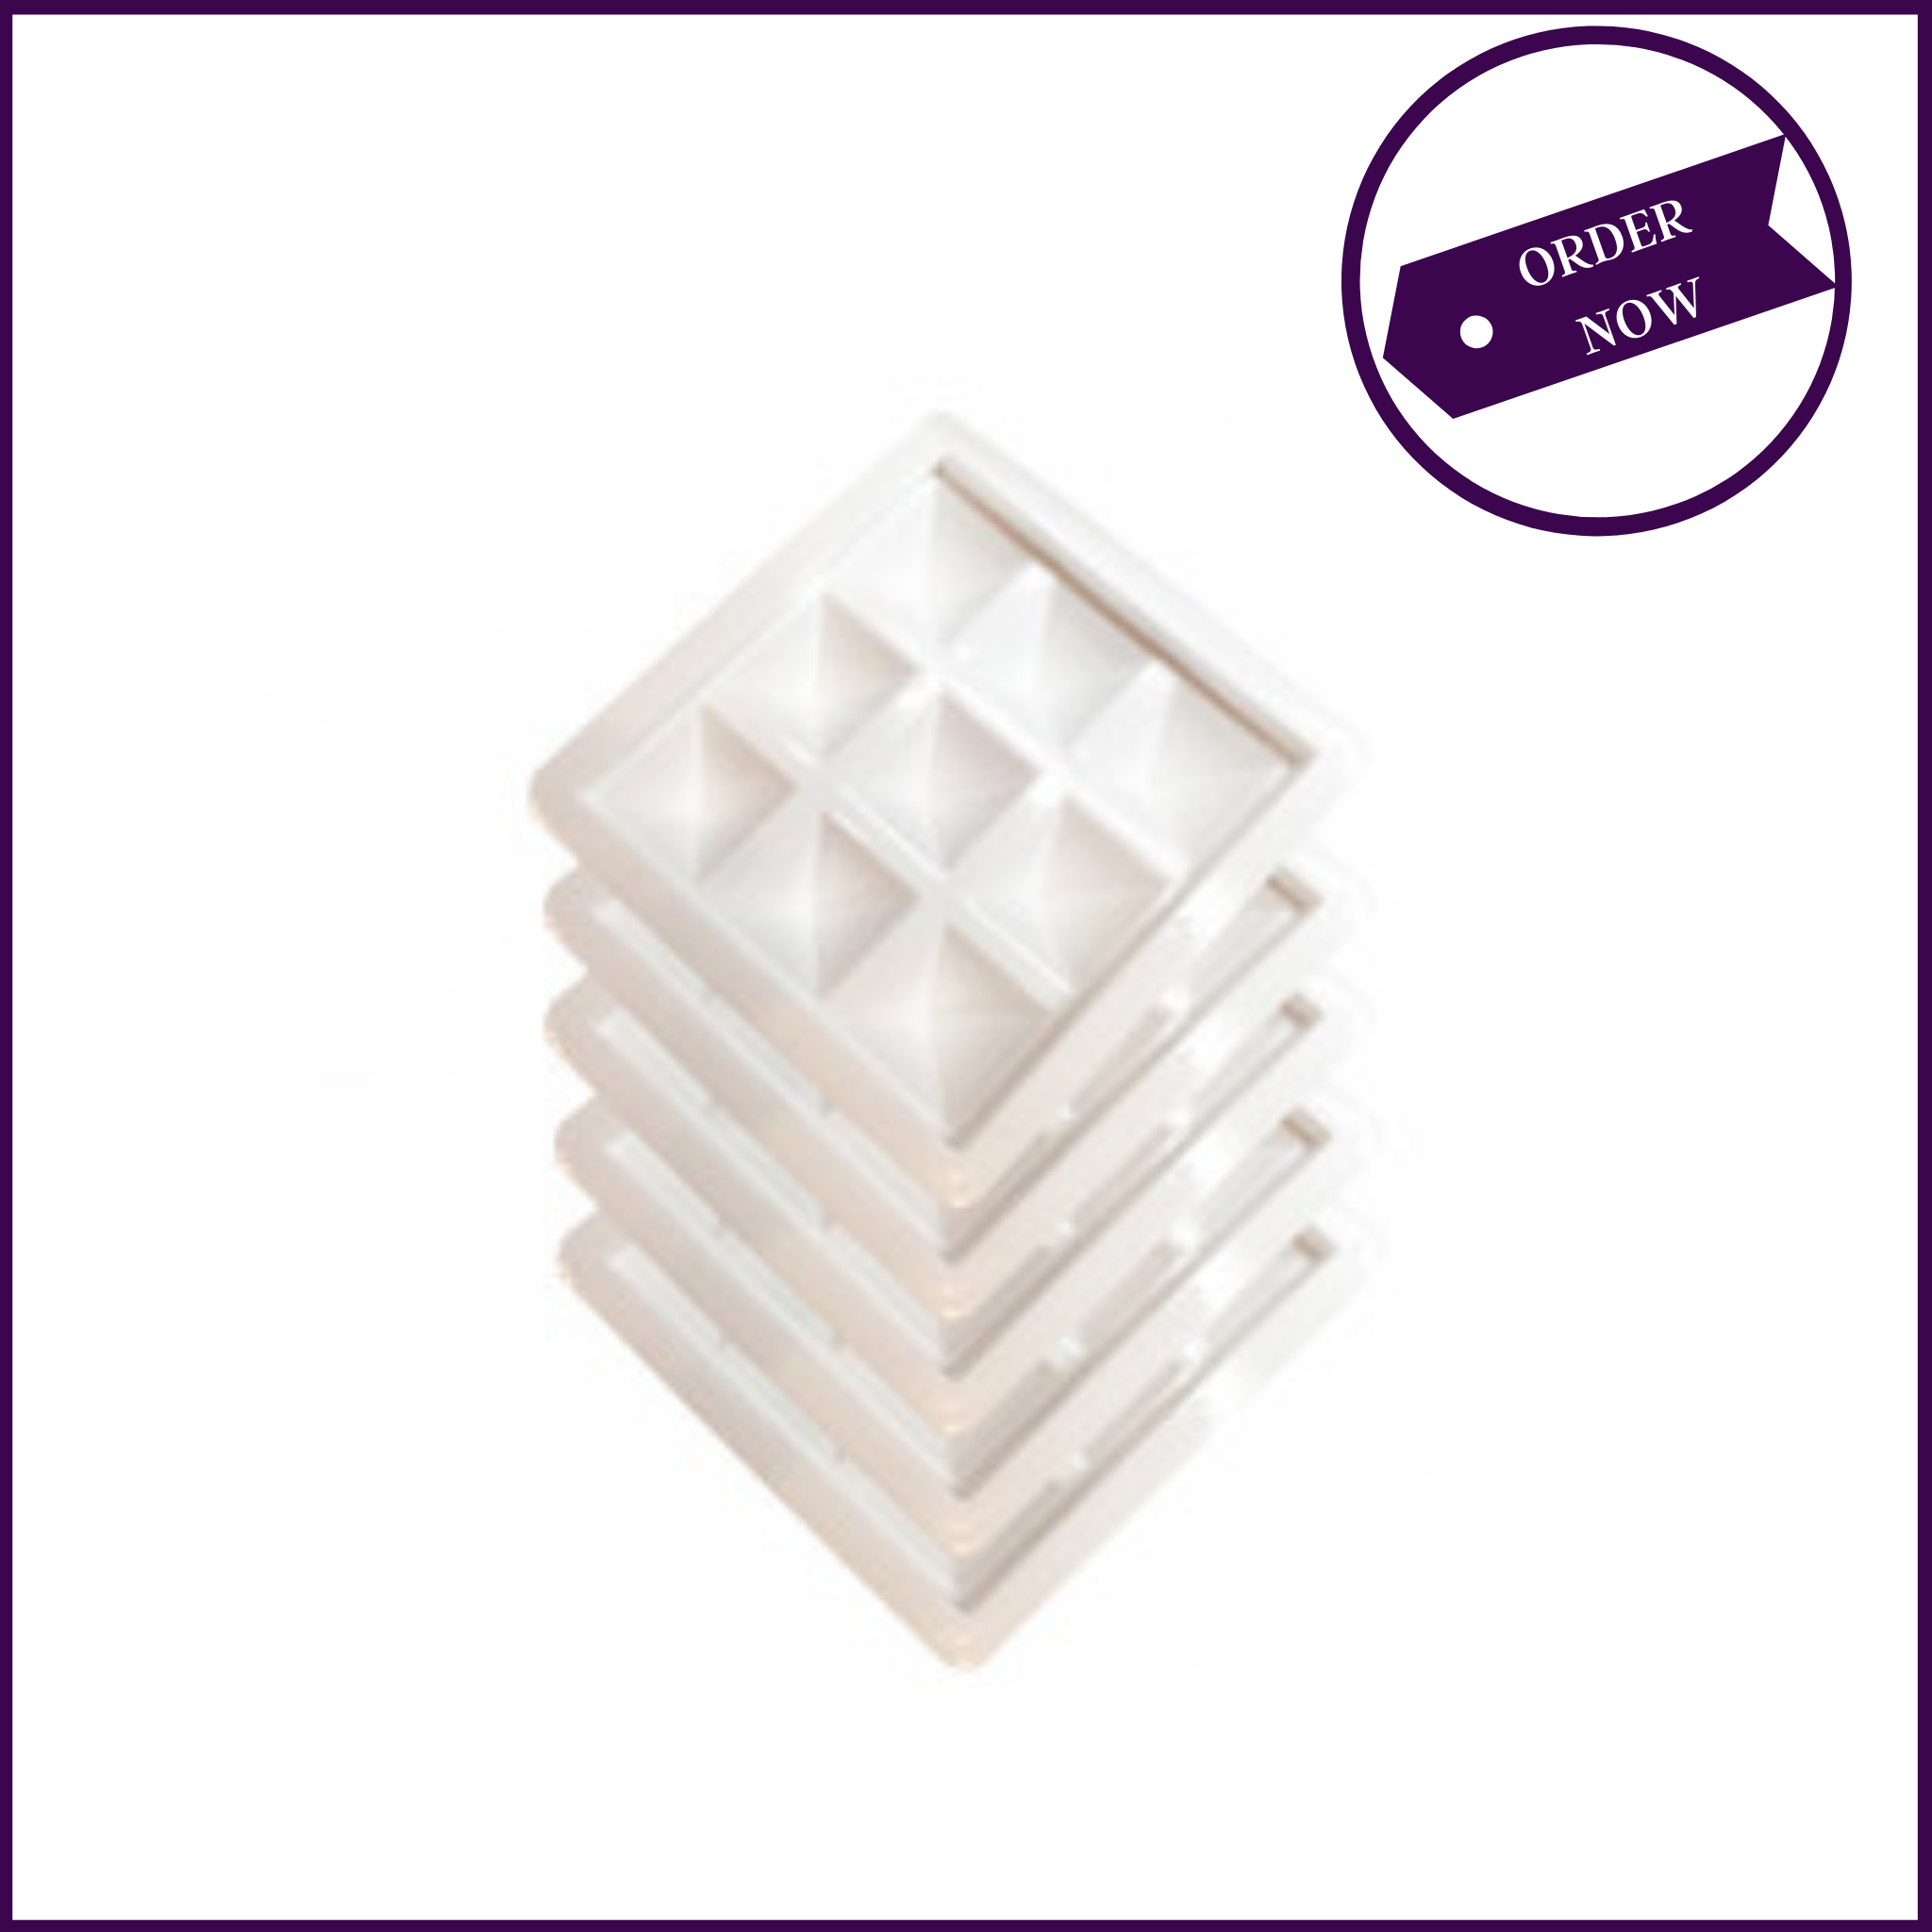 Pyramid Trays For Making Pyramid Ice-cubes (Small & Portable) - Set of 5 Trays - 51pyramids